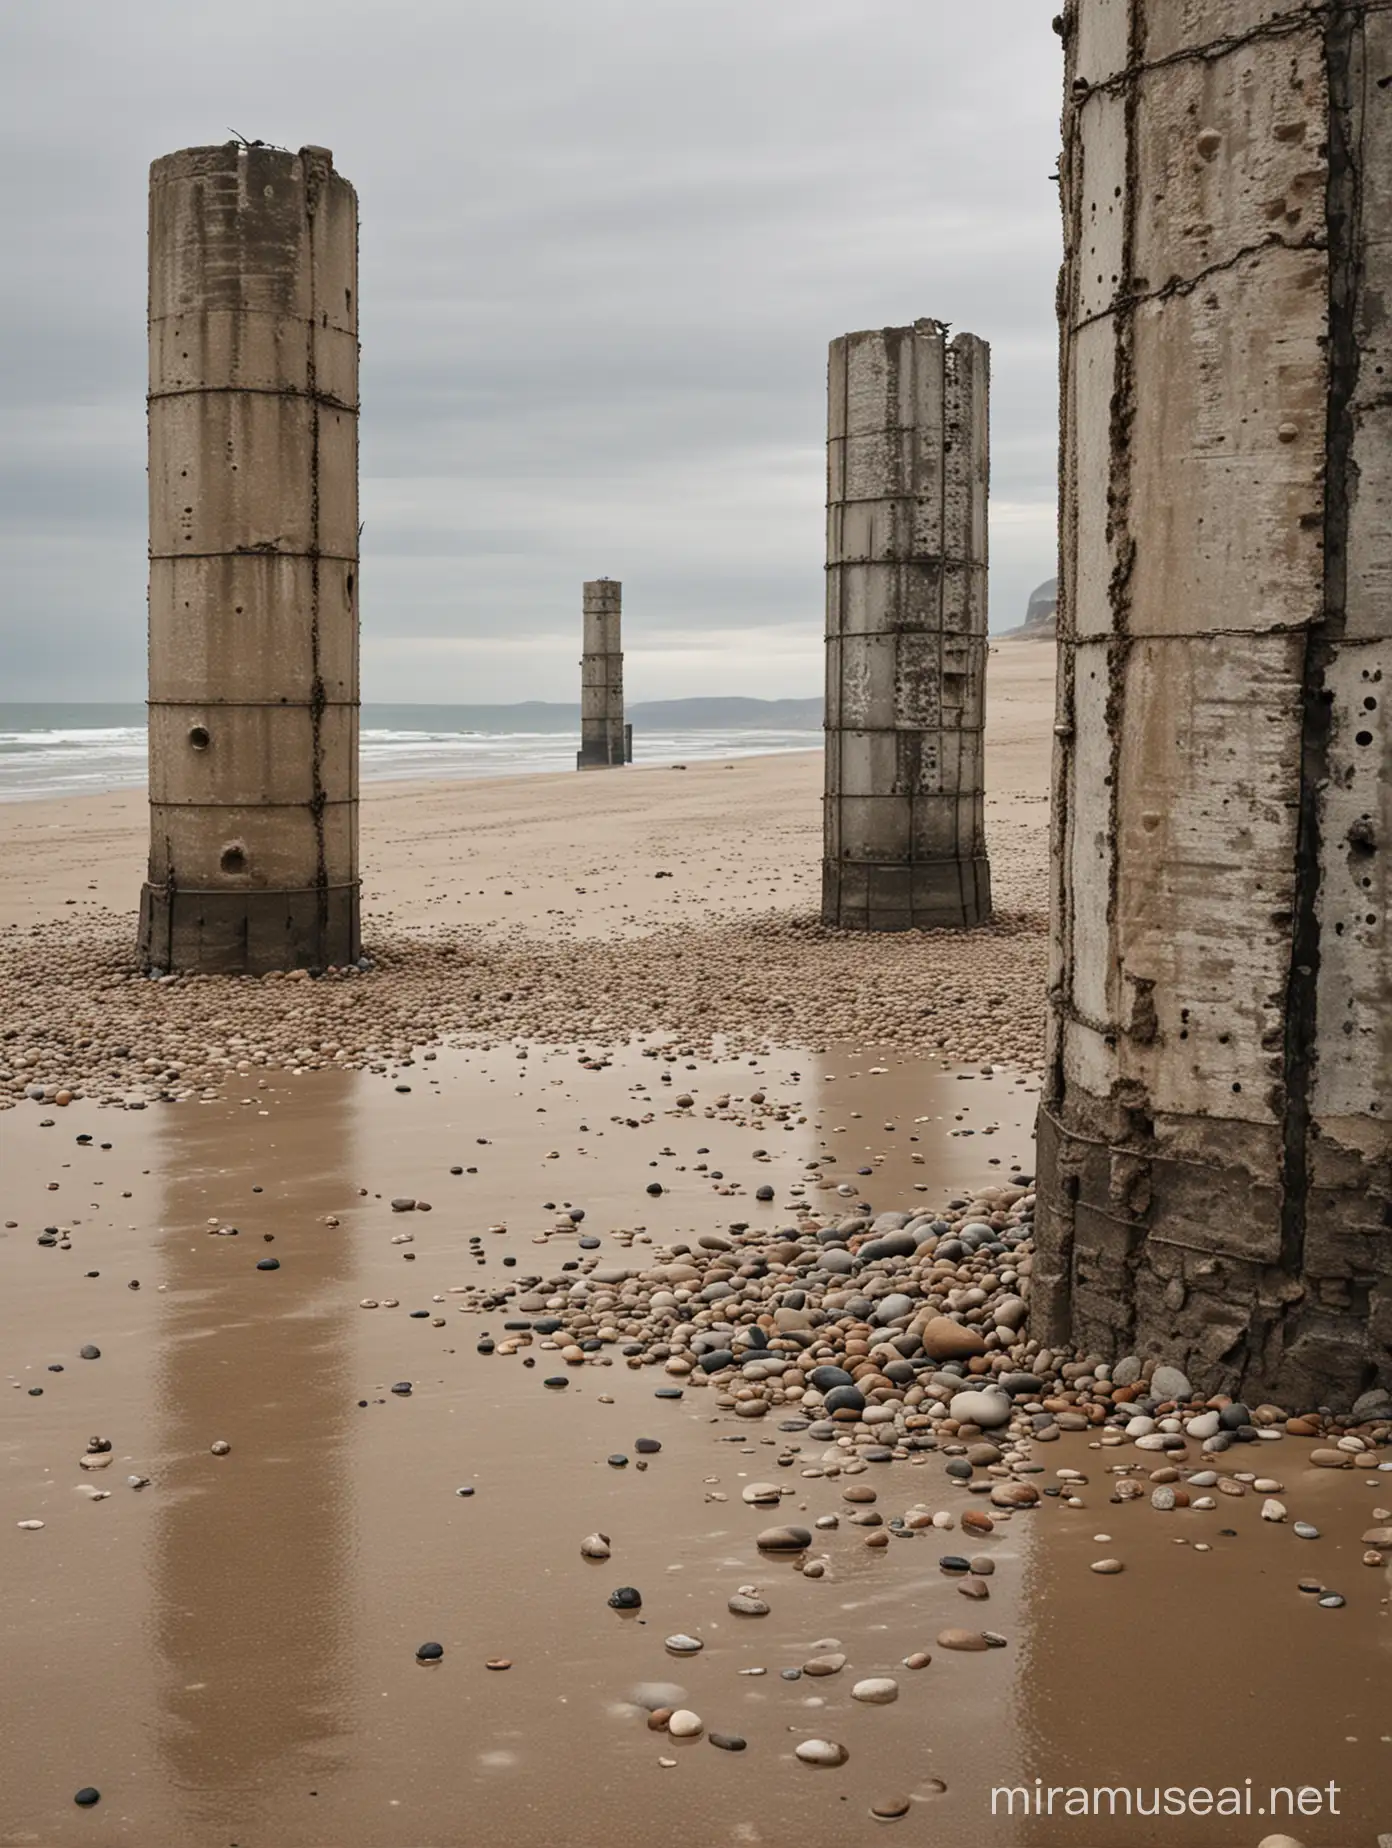 Abandoned Metal Towers on Windy Beach